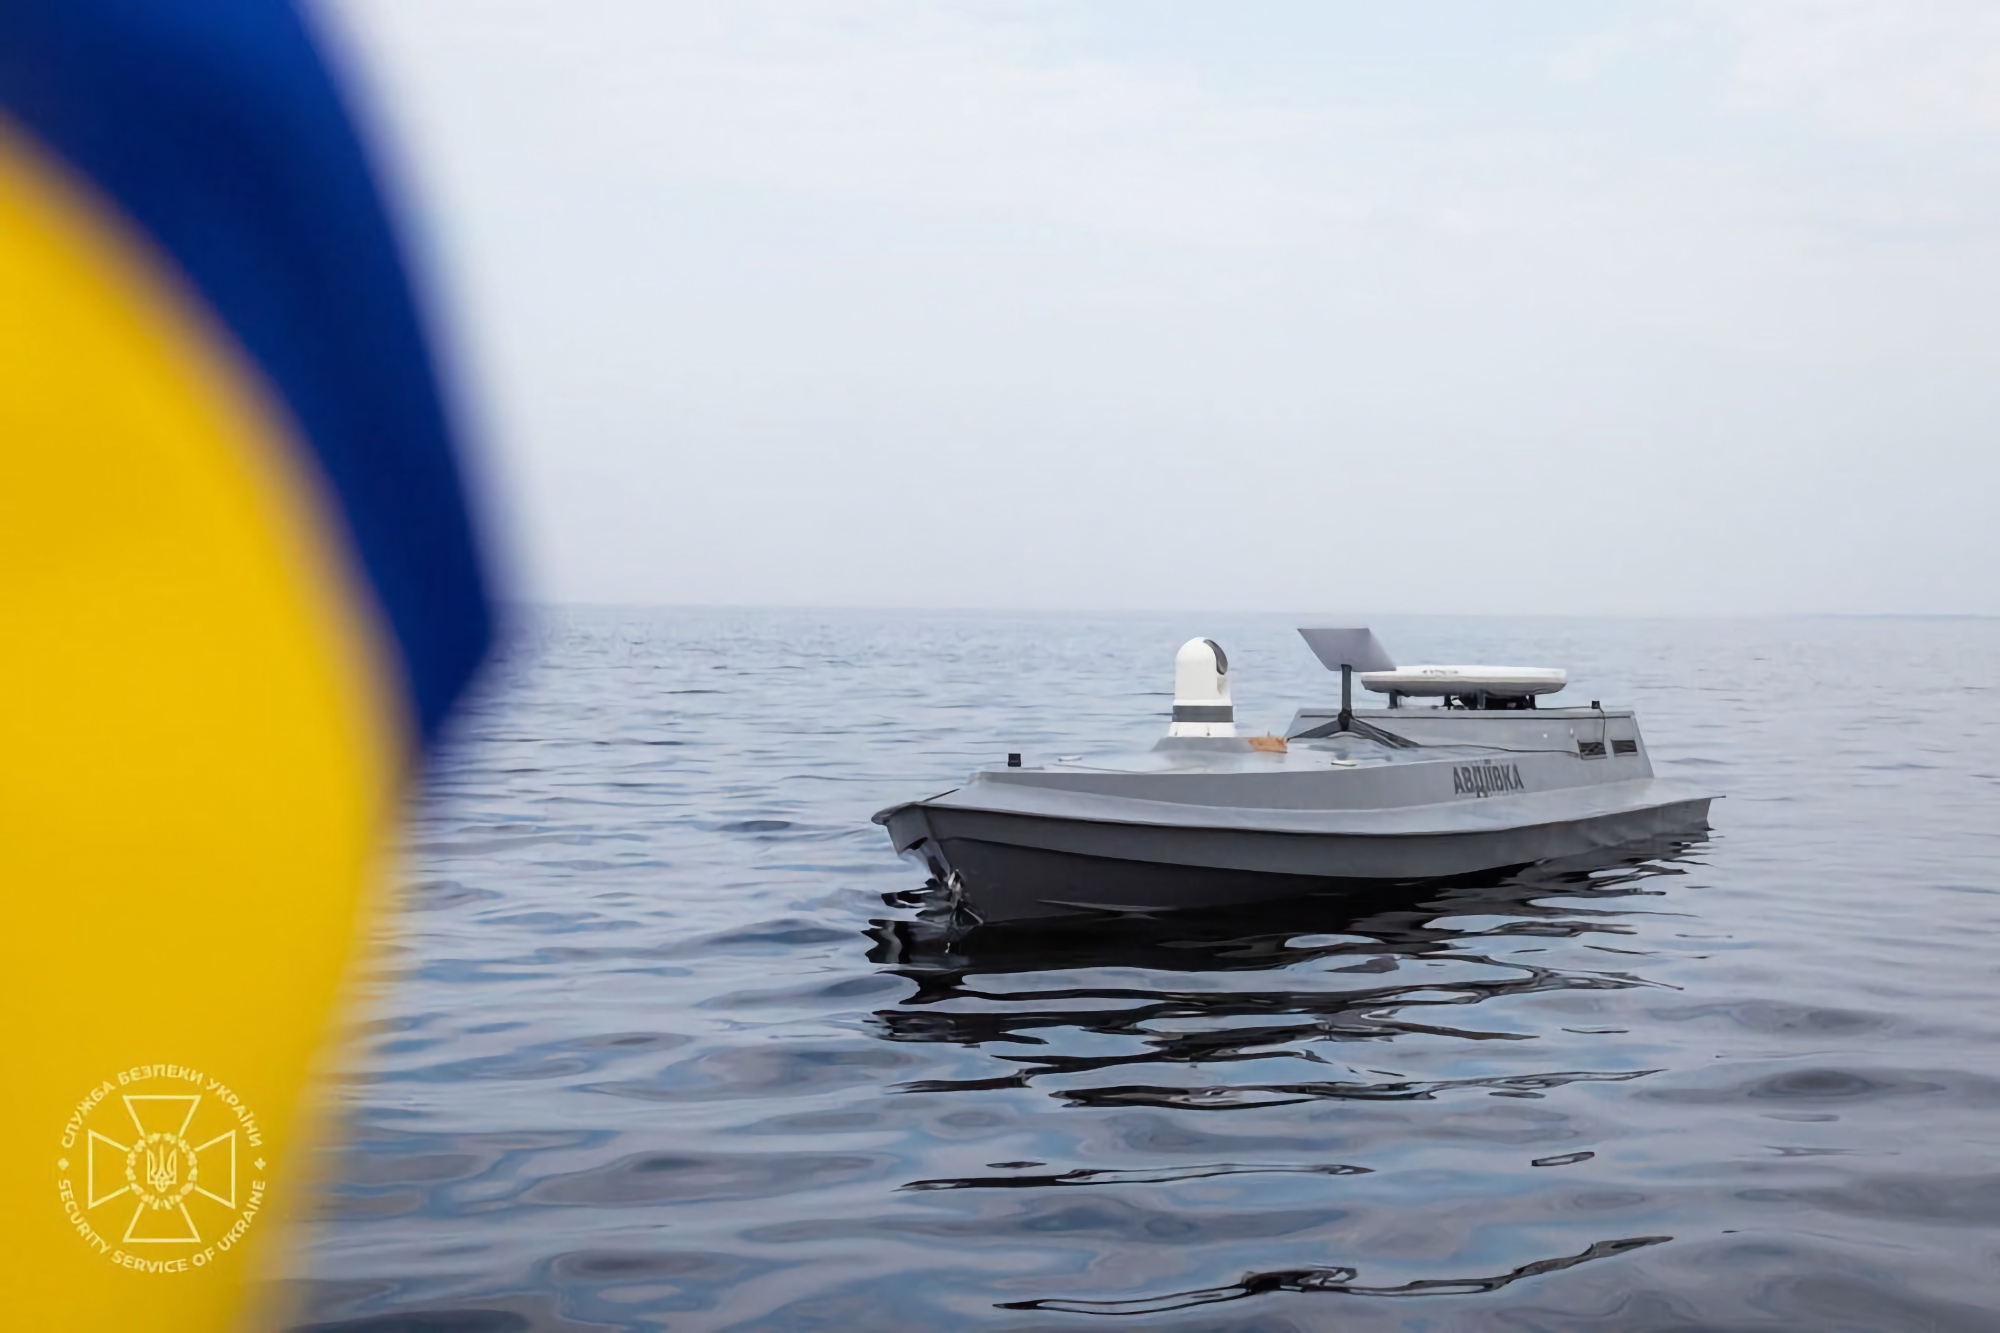 The Security Service of Ukraine is testing a new Sea Baby maritime drone with a target engagement range of up to 1,000 km and a payload of about a tonne